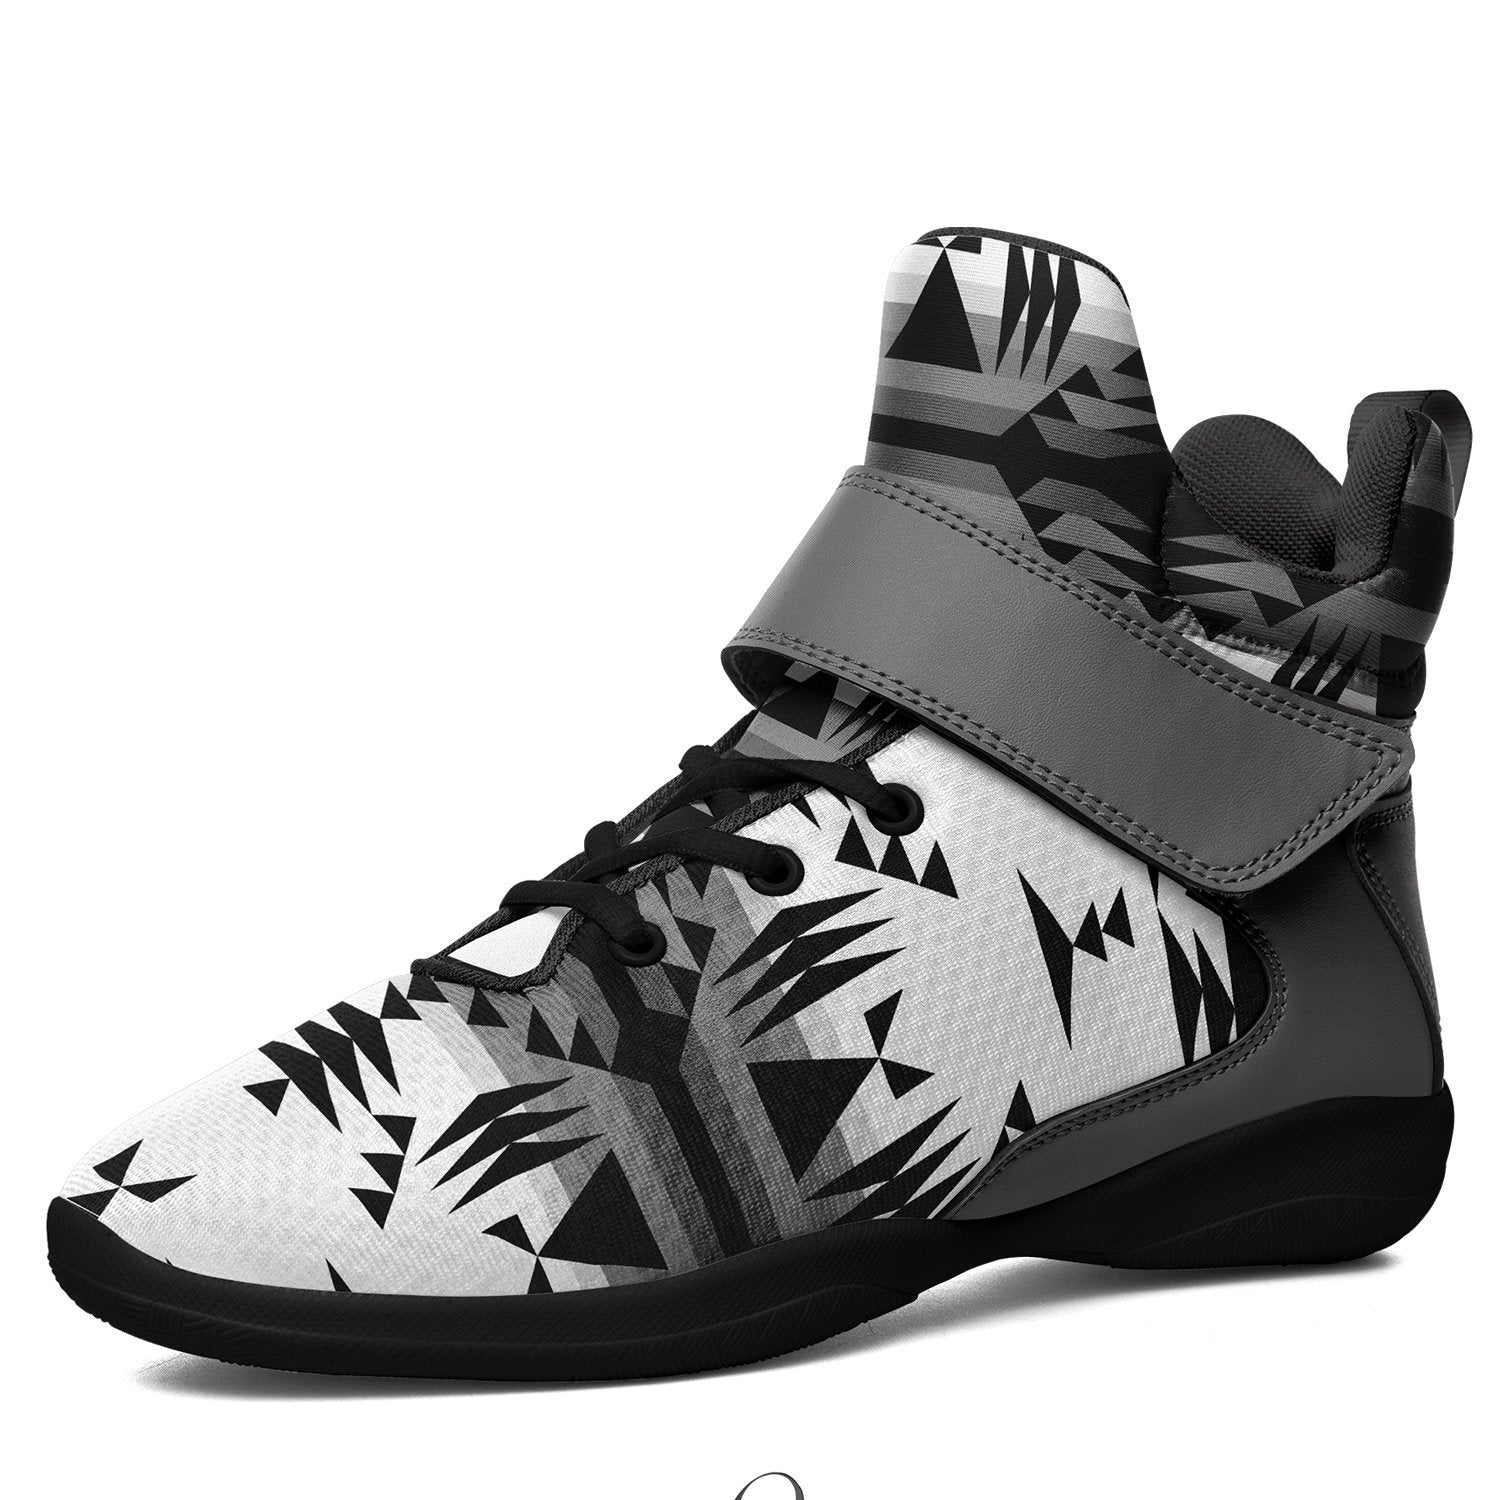 Between the Mountains White and Black Ipottaa Basketball / Sport High Top Shoes - Black Sole 49 Dzine 